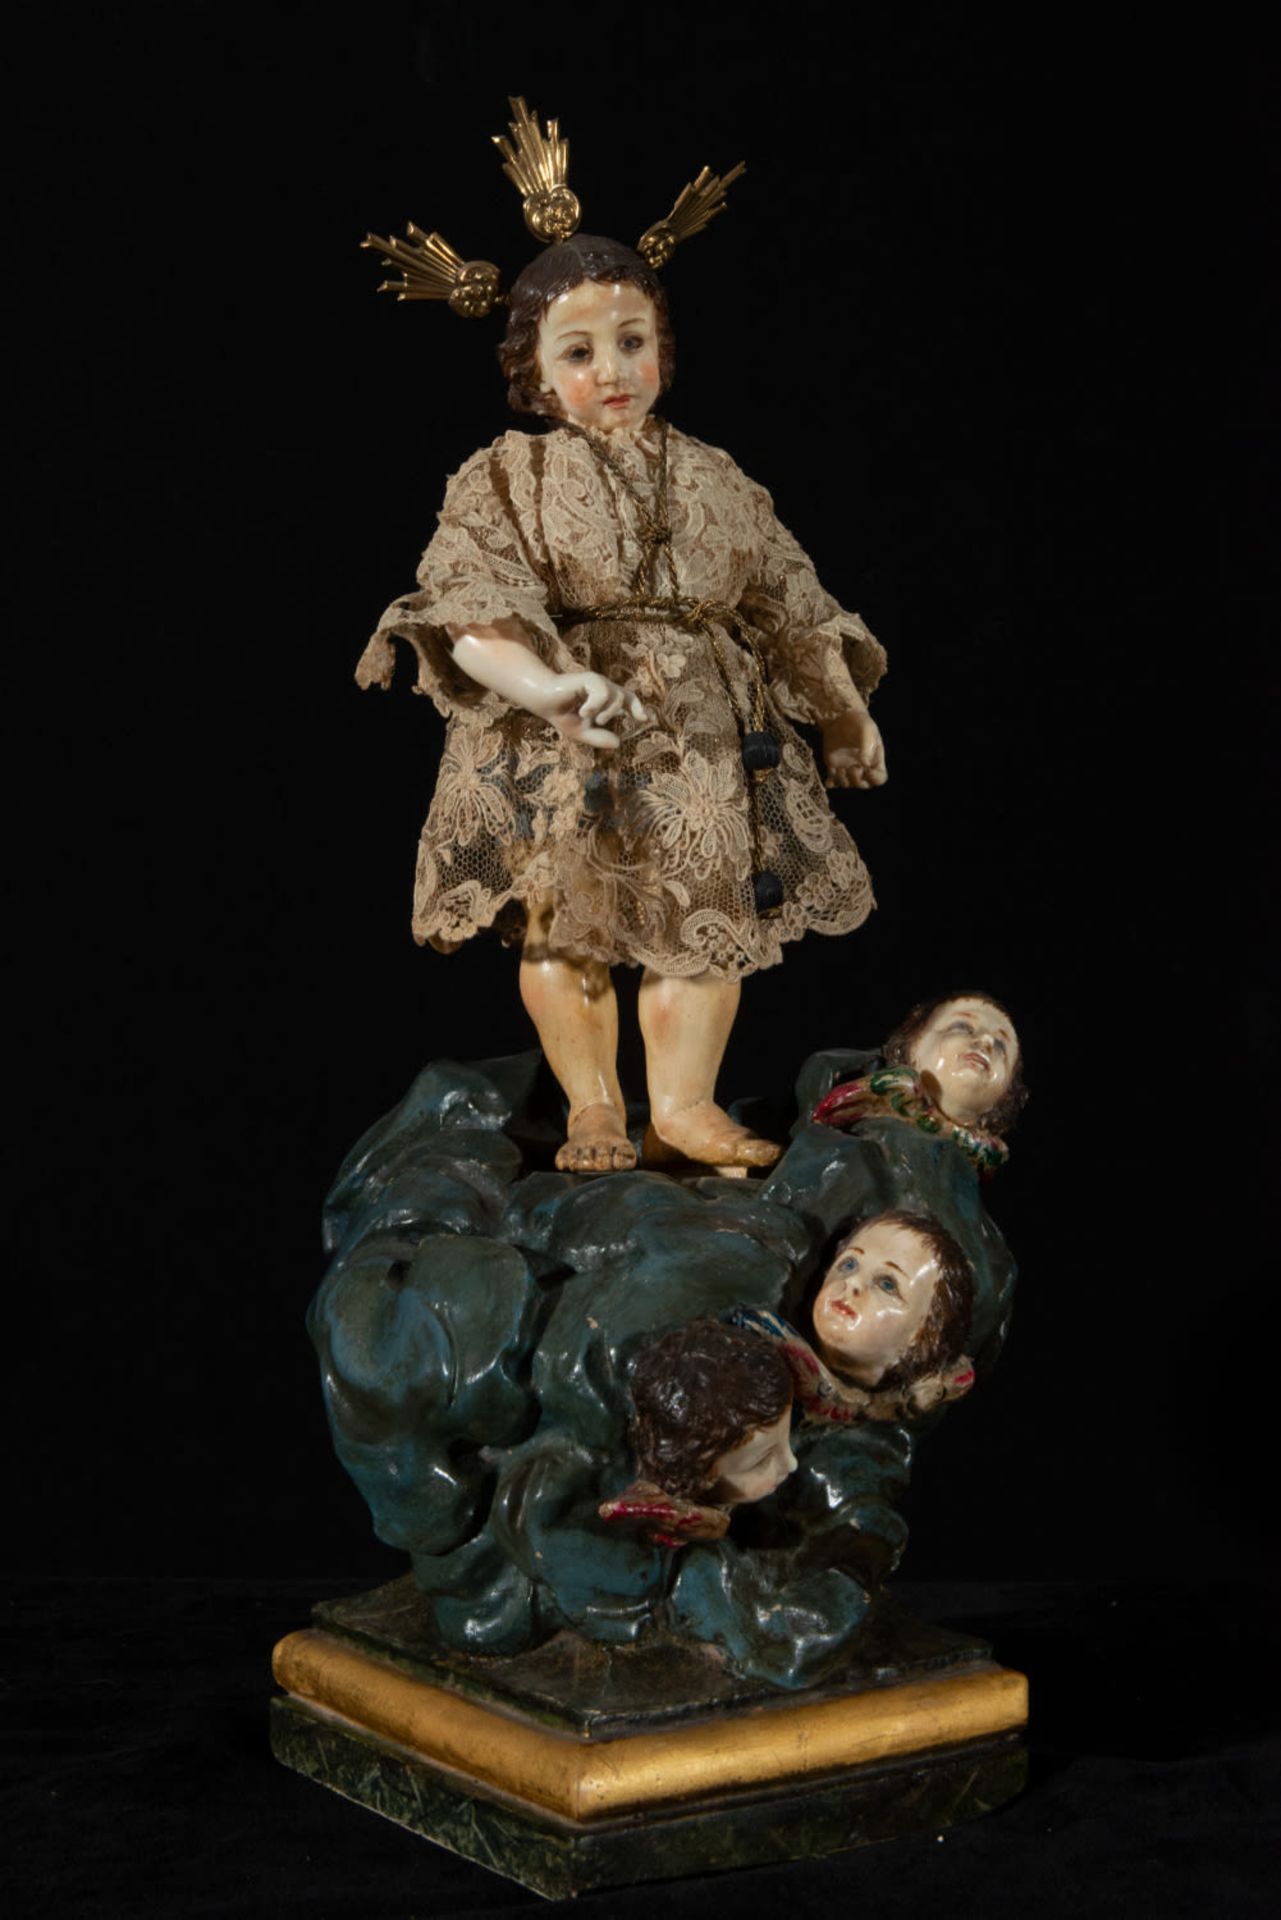 Important Hispanic Filipino Holy Child of Dress in Ivory, 18th century Philippine colonial school - Image 4 of 6